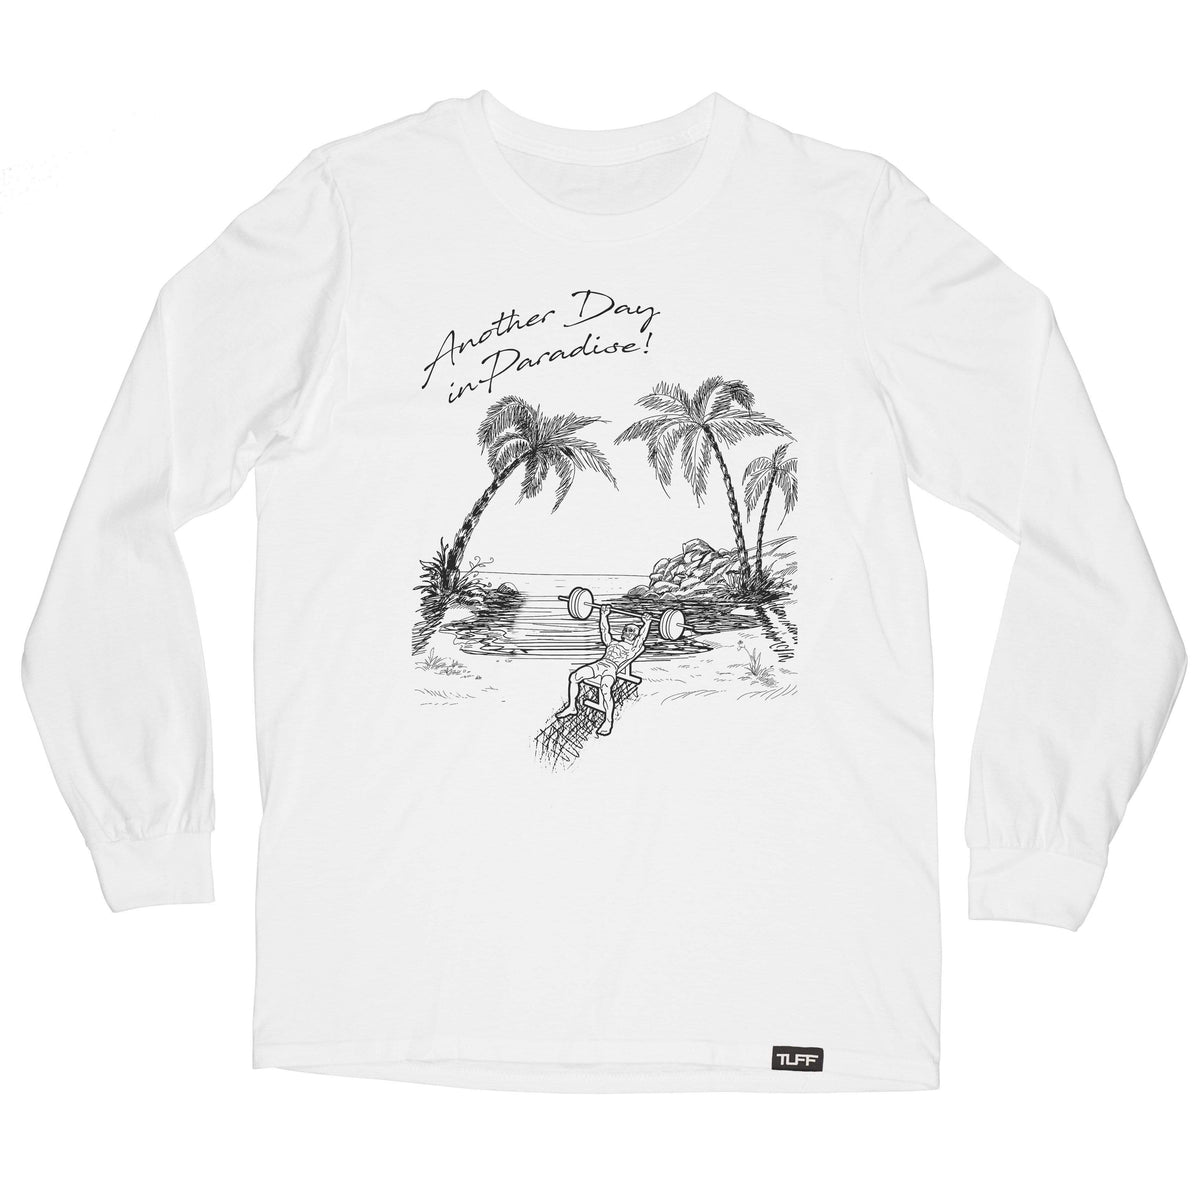 Another Day in Paradise Long Sleeve Tee S / White TuffWraps.com